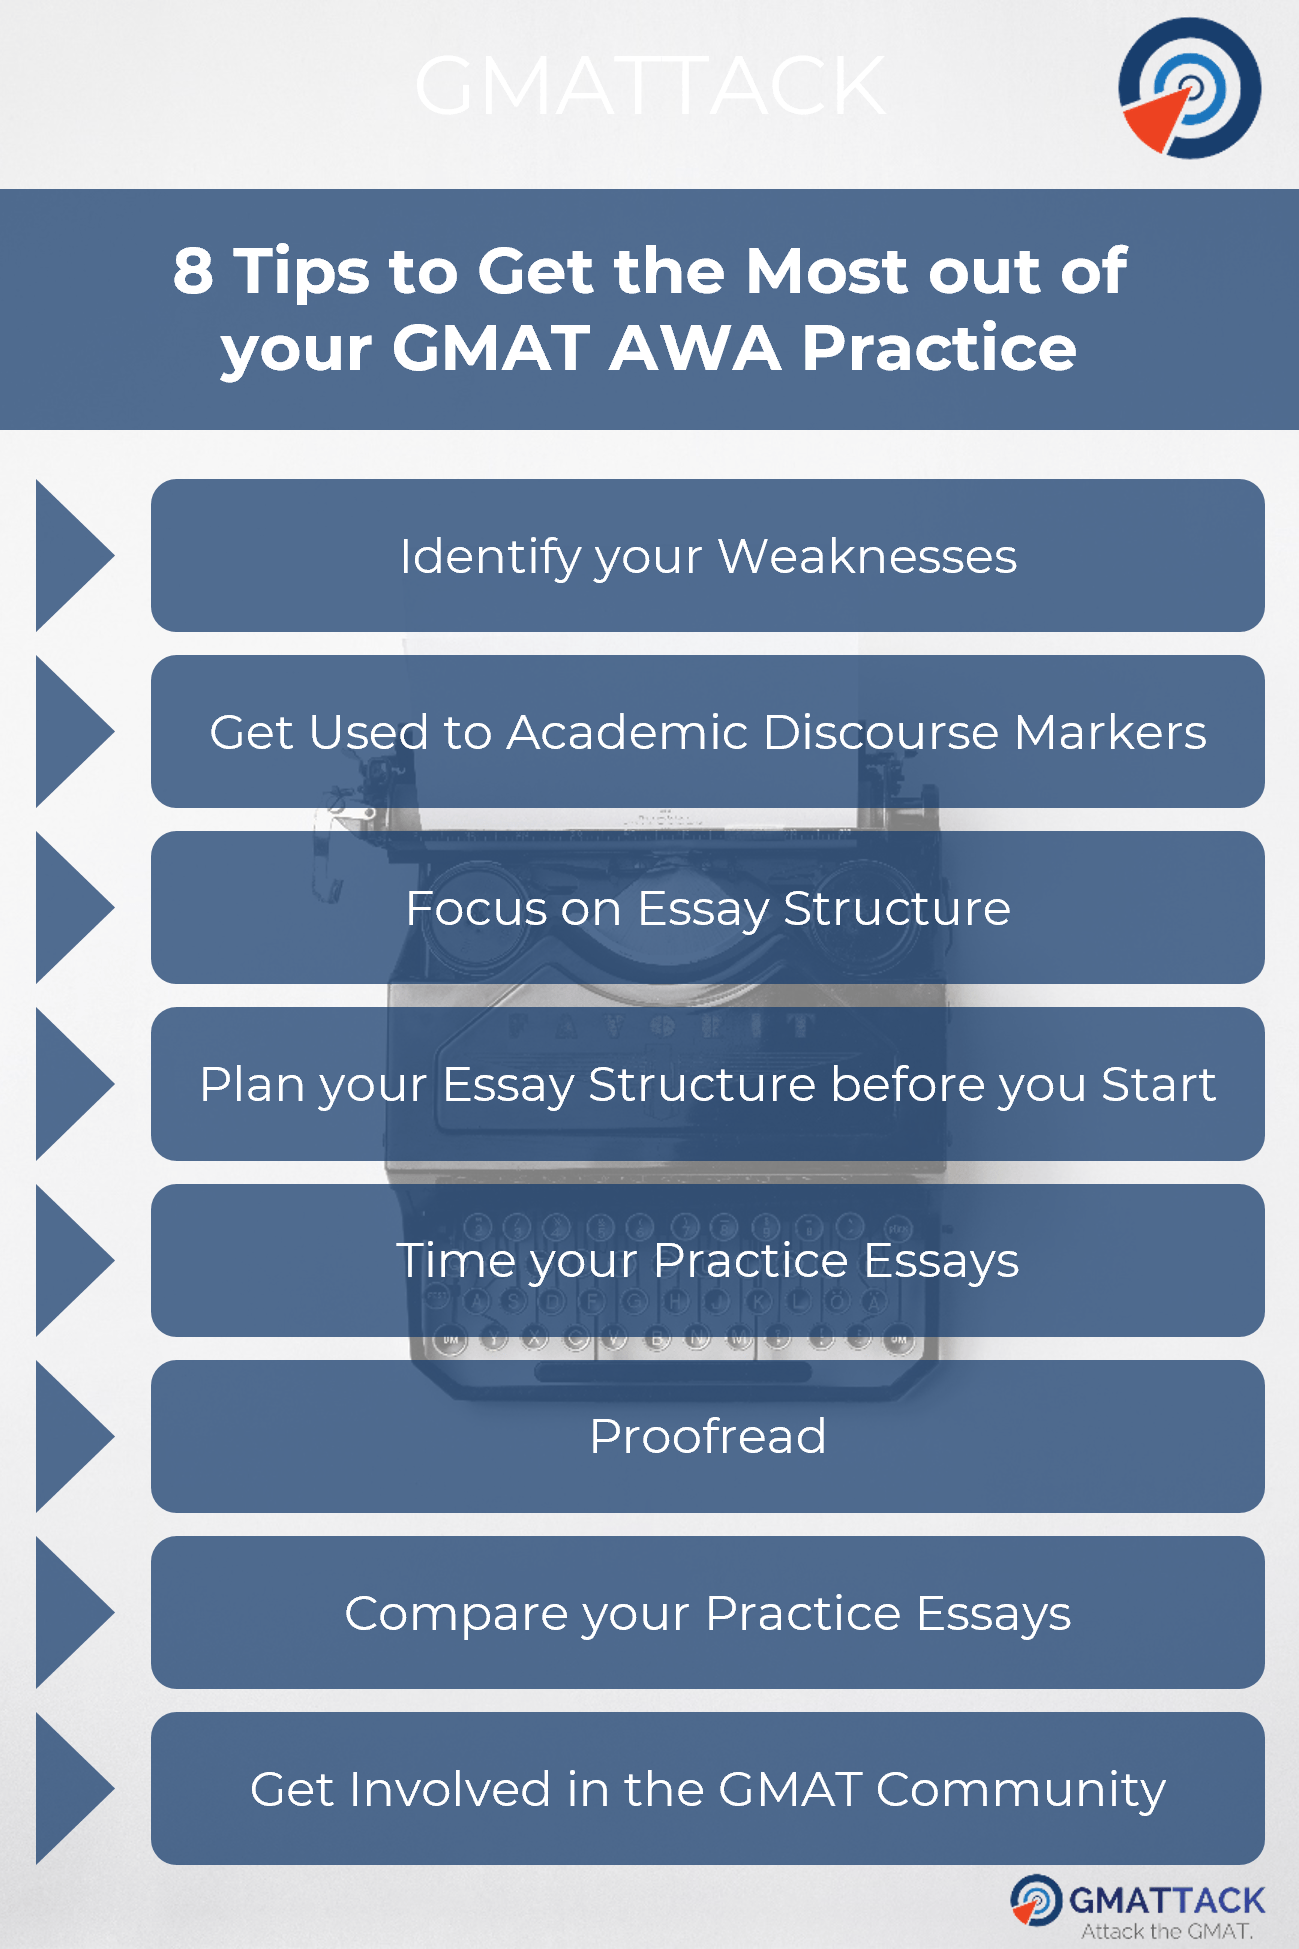 8 Tips to Get the Most out of your GMAT AWA Practice